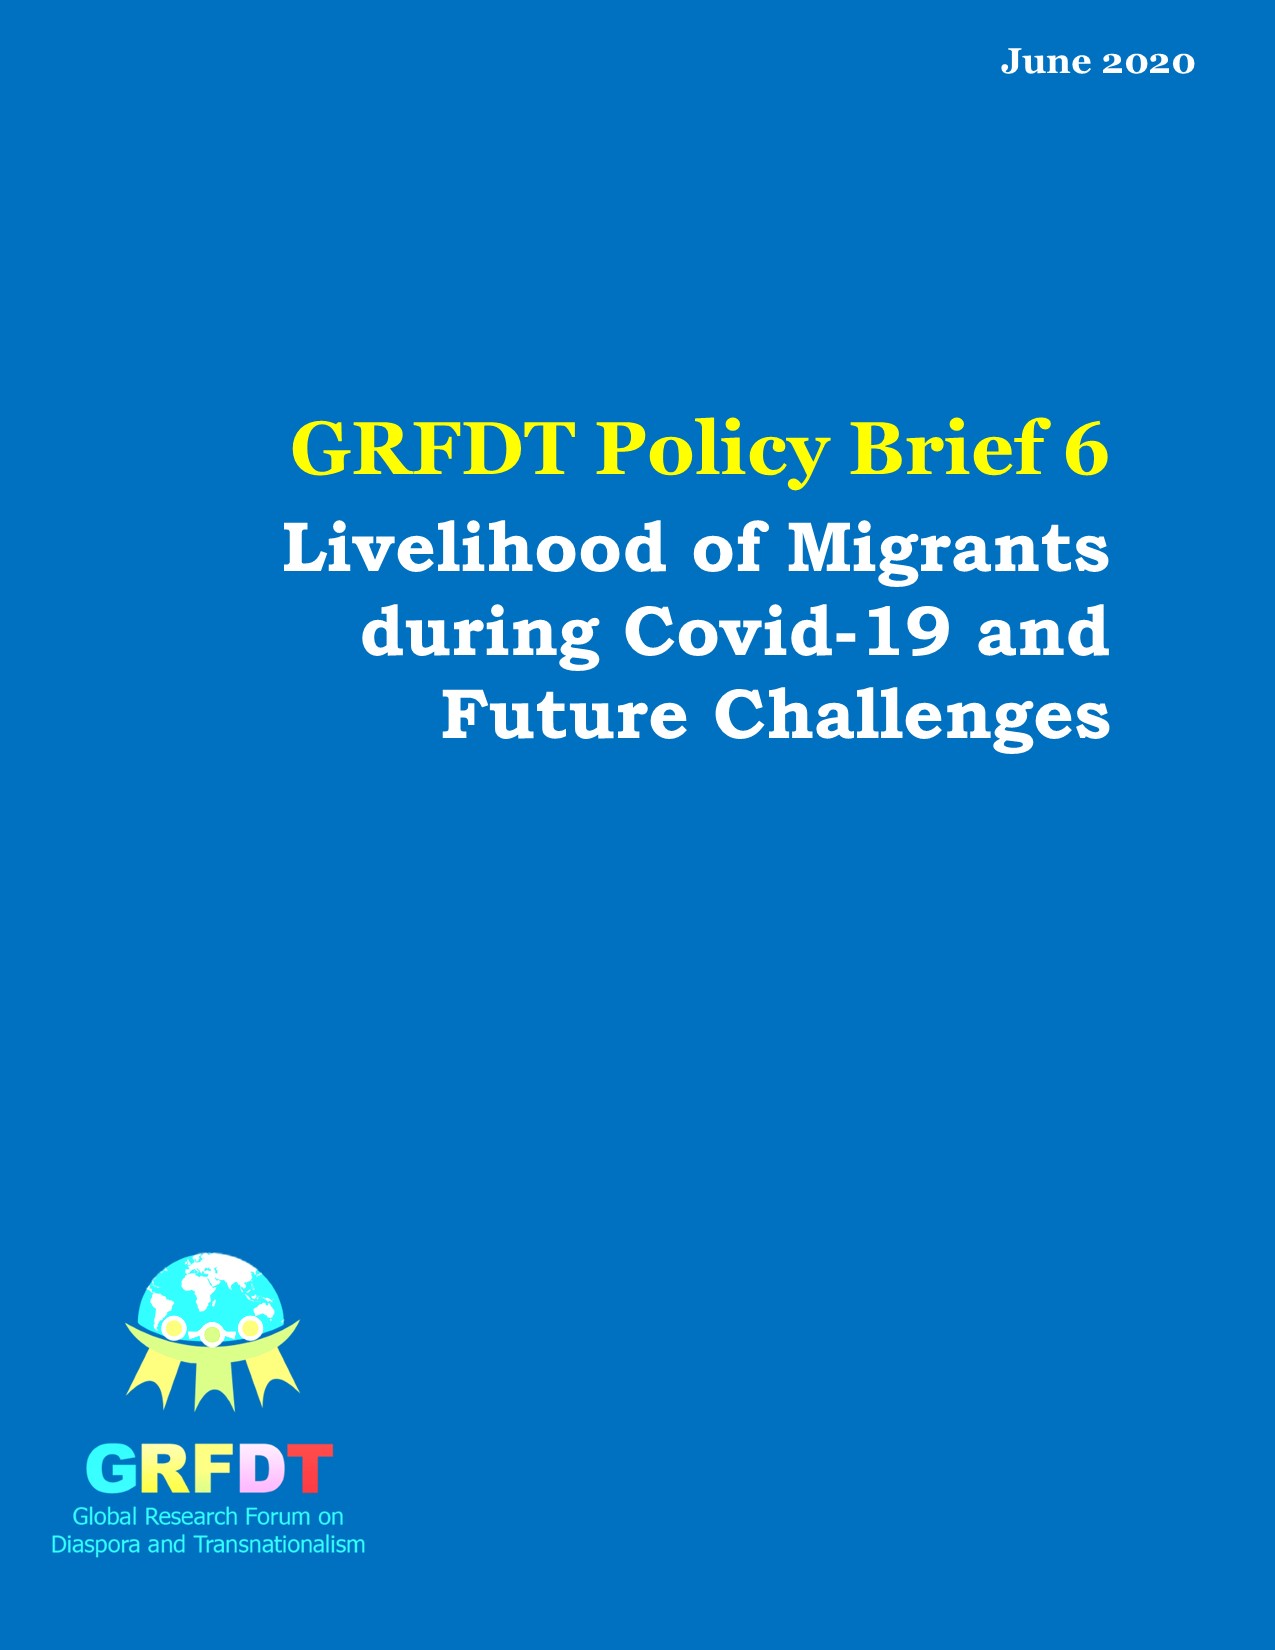 Livelihood of Migrants during Covid-19 and Future Challenges